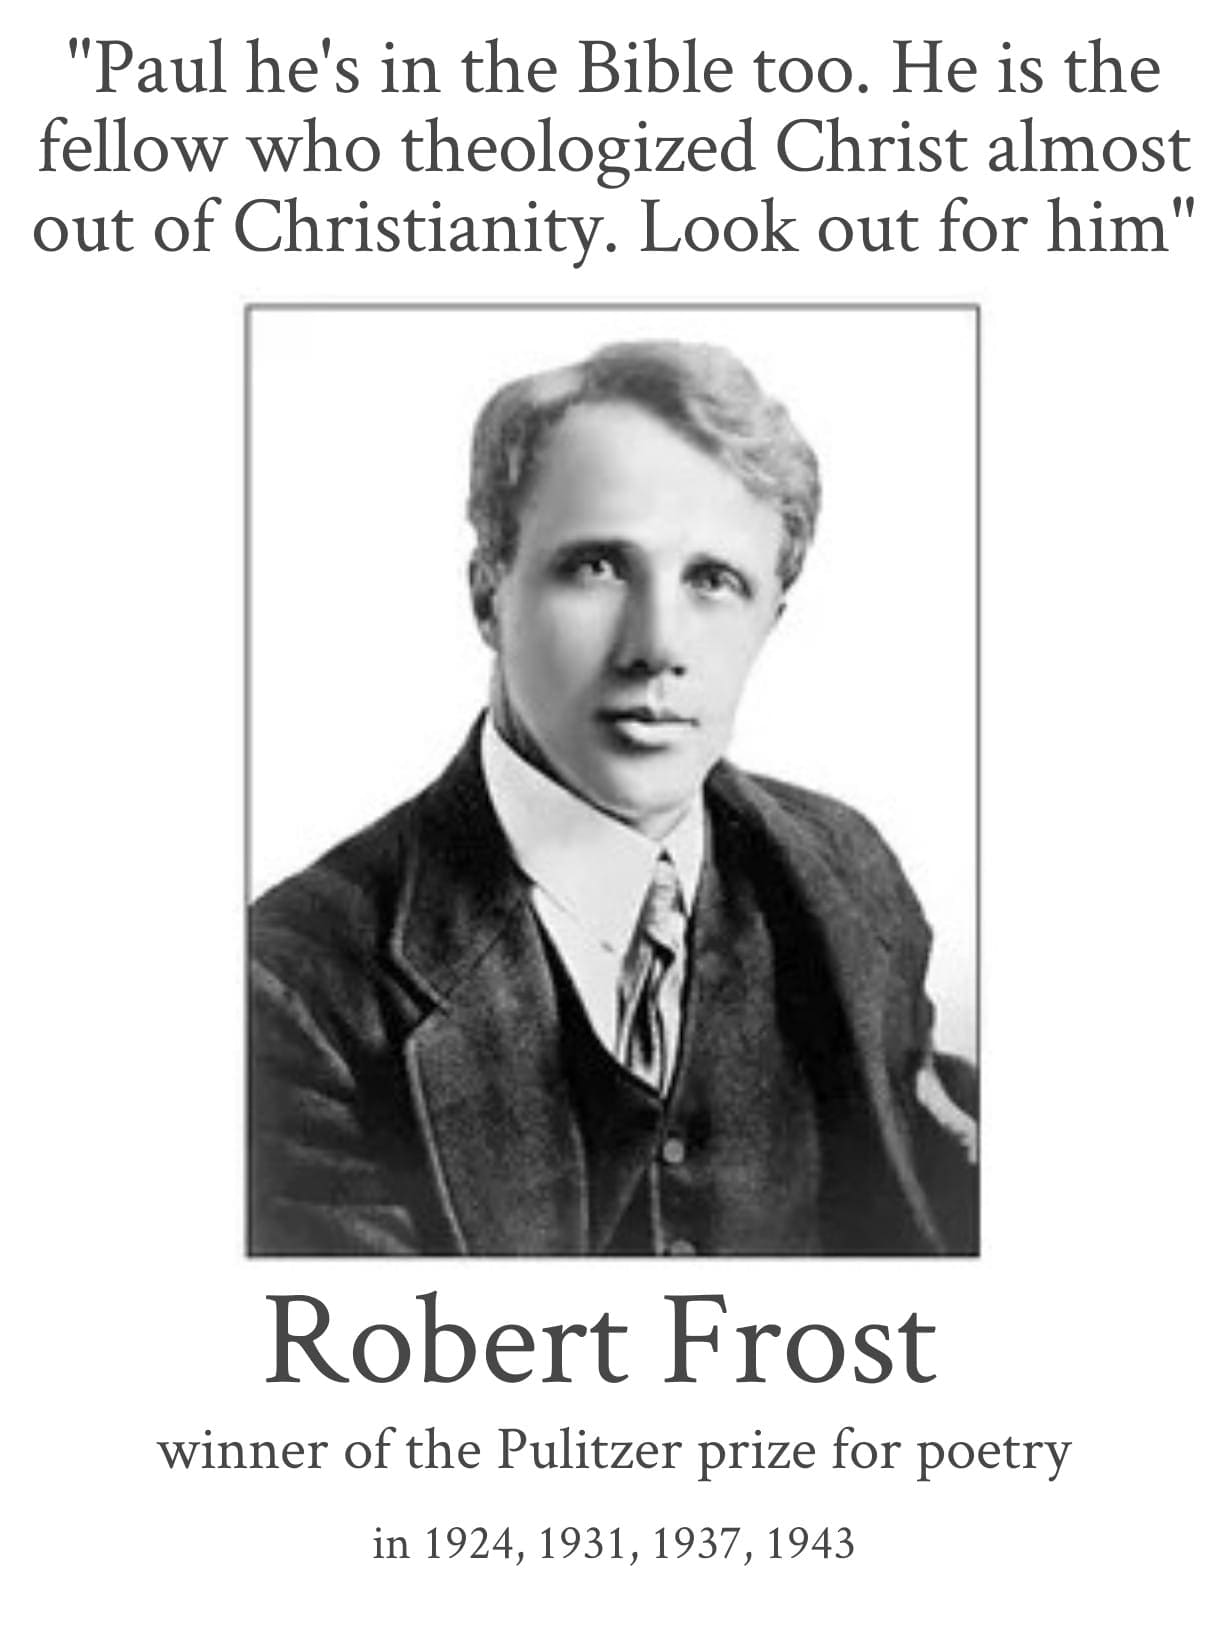 Robert Frost, look out for Paul.